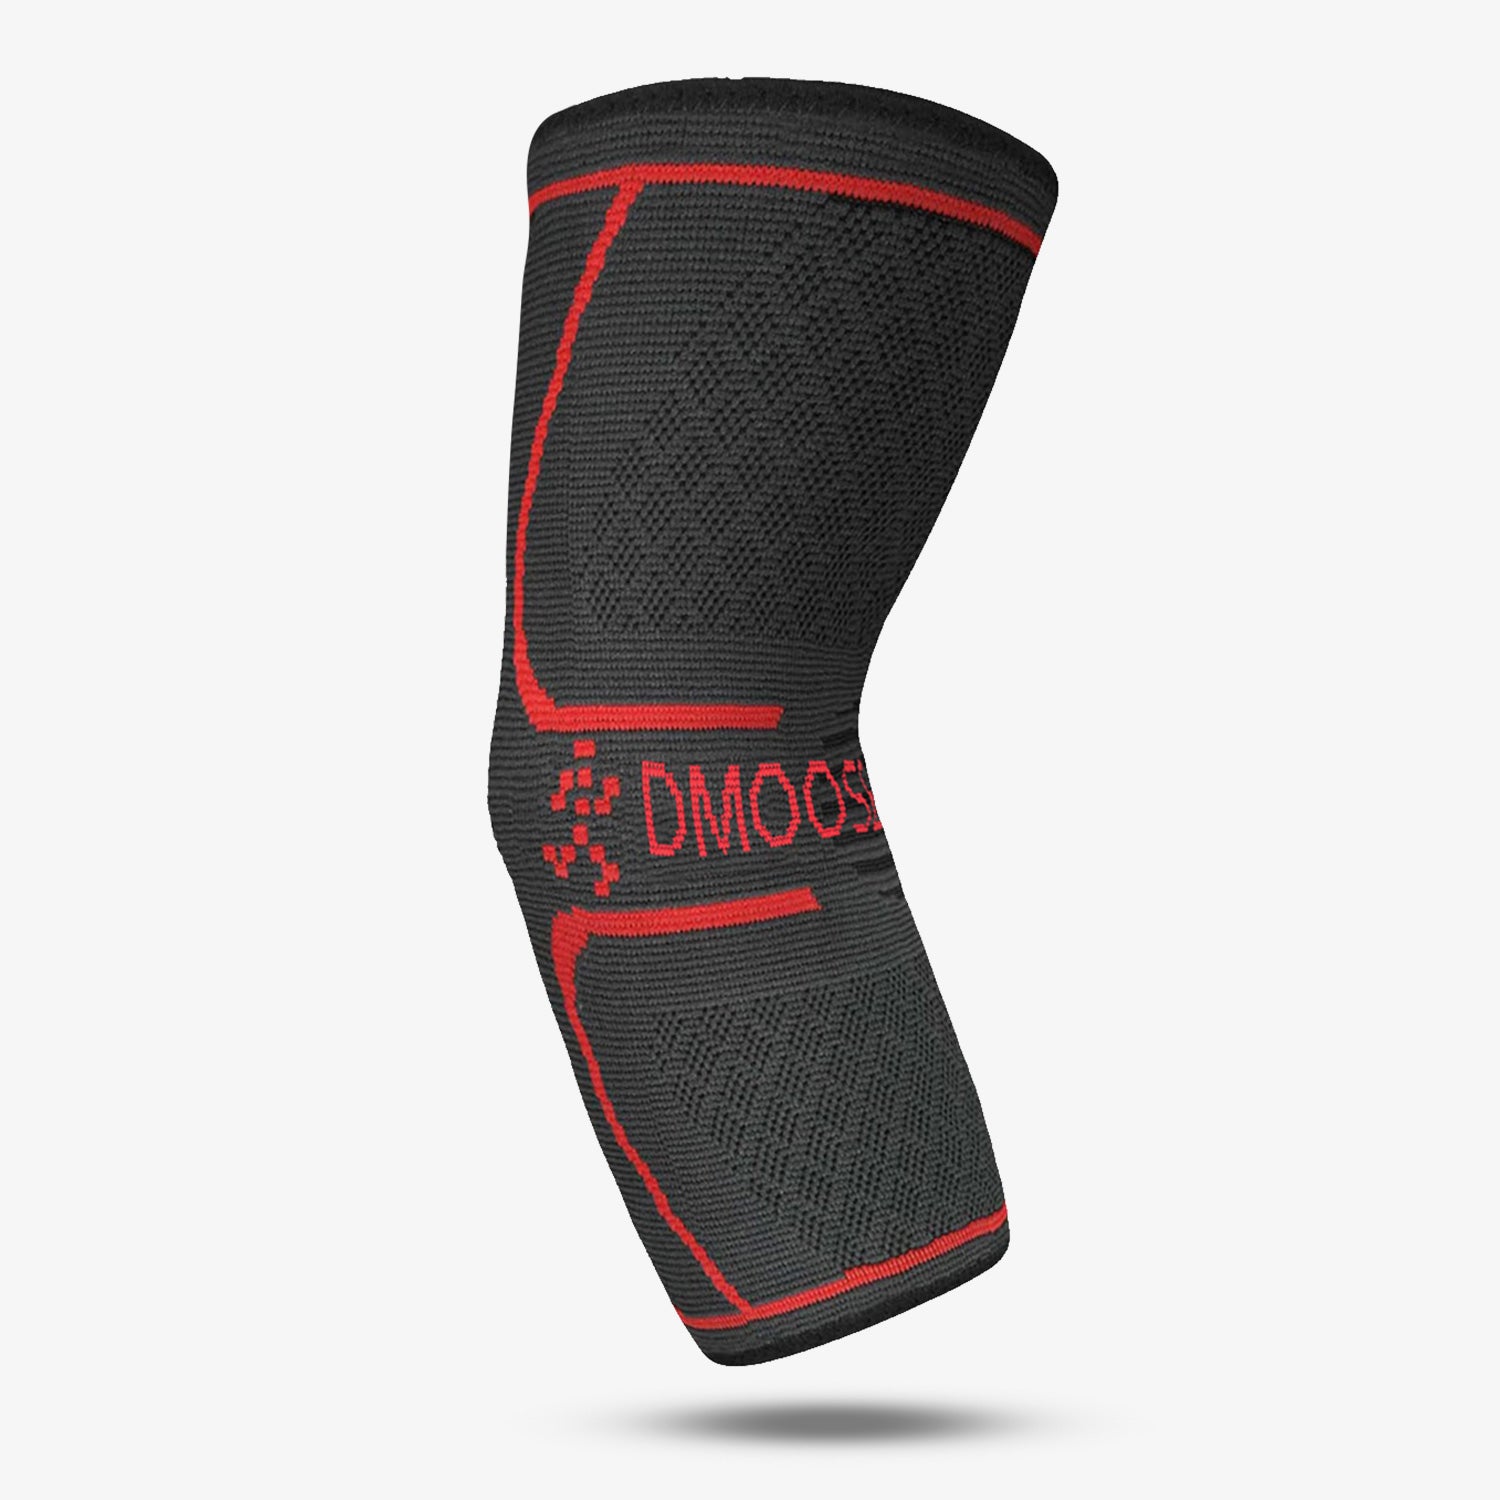 Compression Sleeve Products & Their Benefits · Remain in the Game